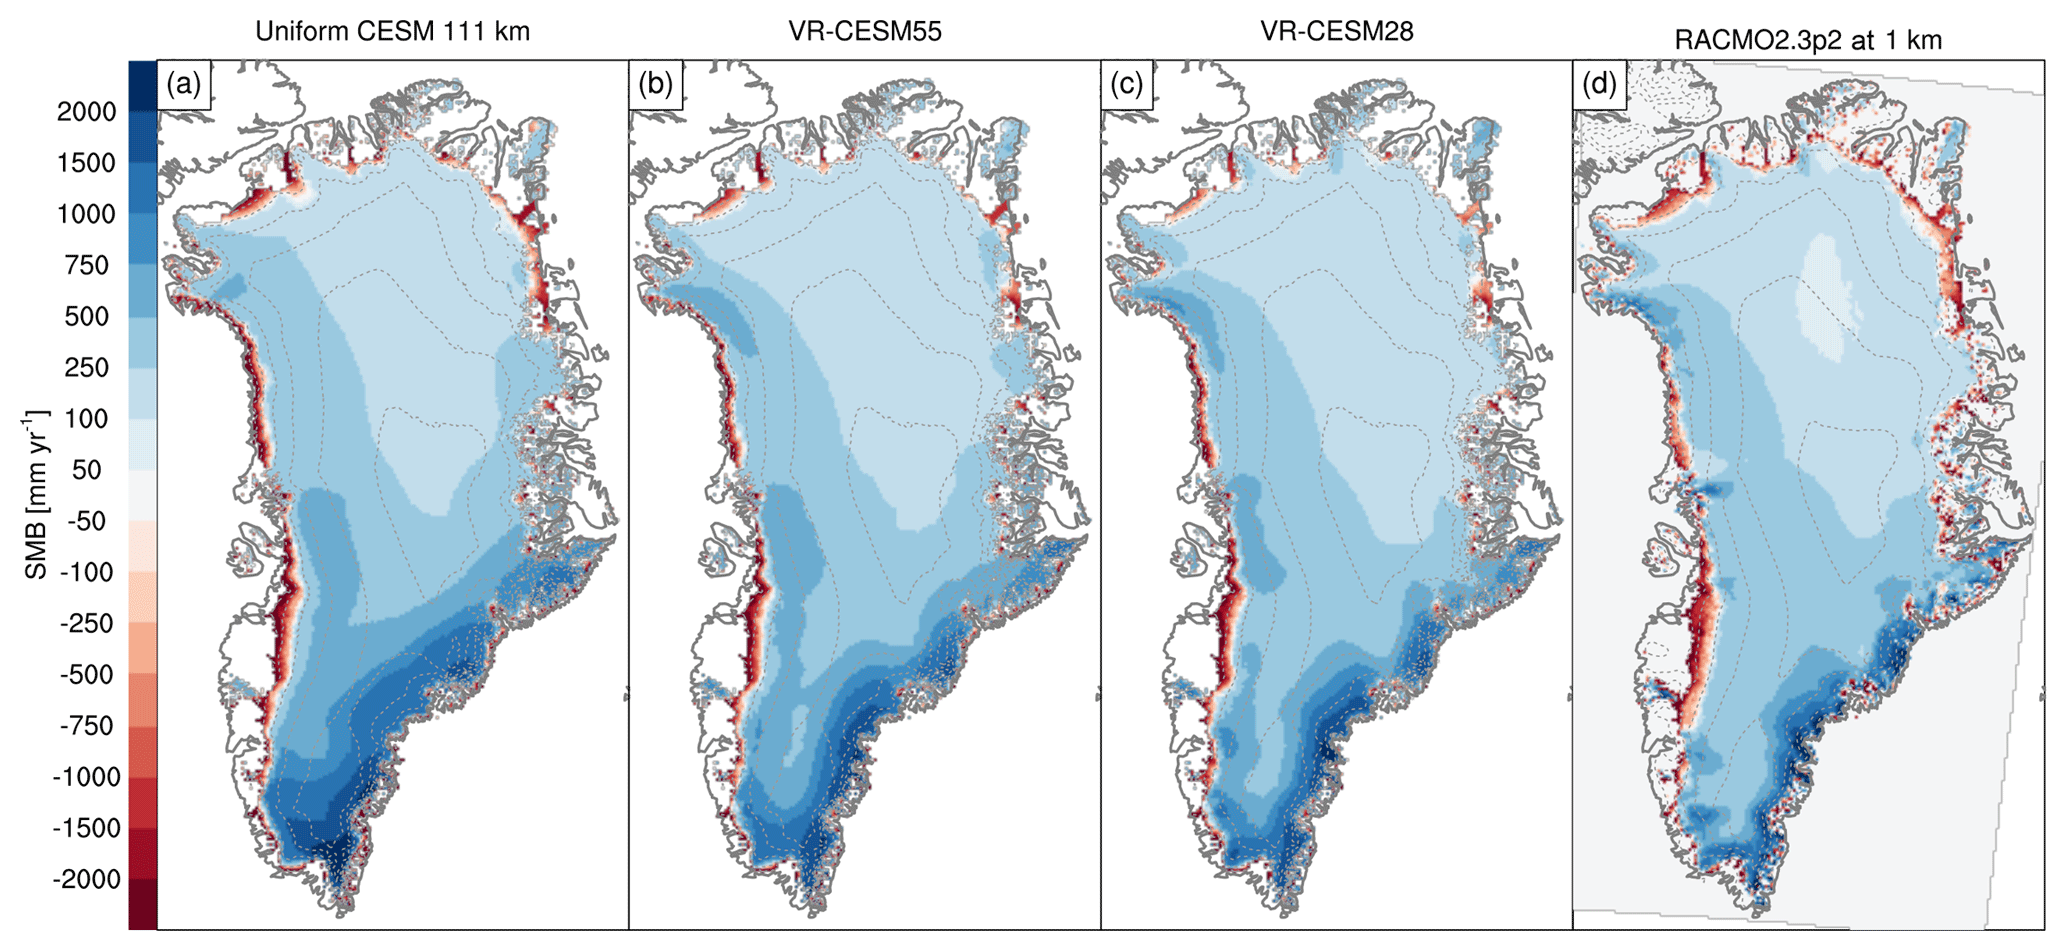 TC - Regional grid refinement in an Earth system model: impacts the simulated Greenland surface mass balance